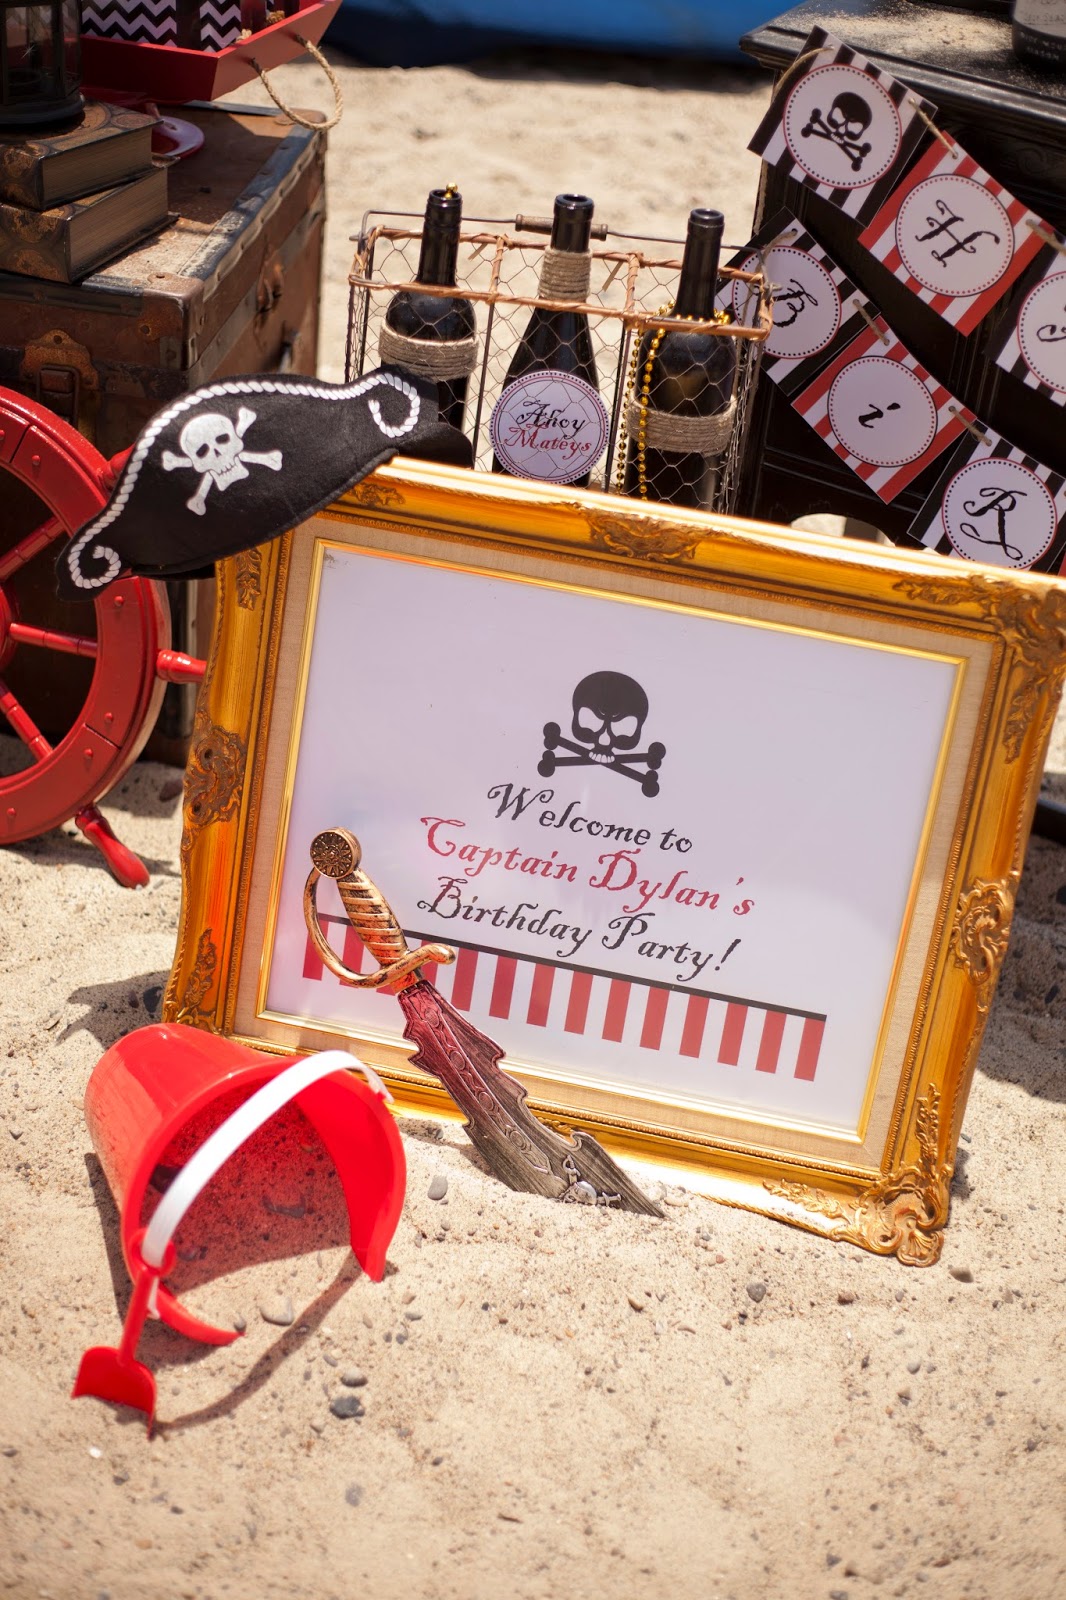 LAURA'S little PARTY: Pirate party on the beach!